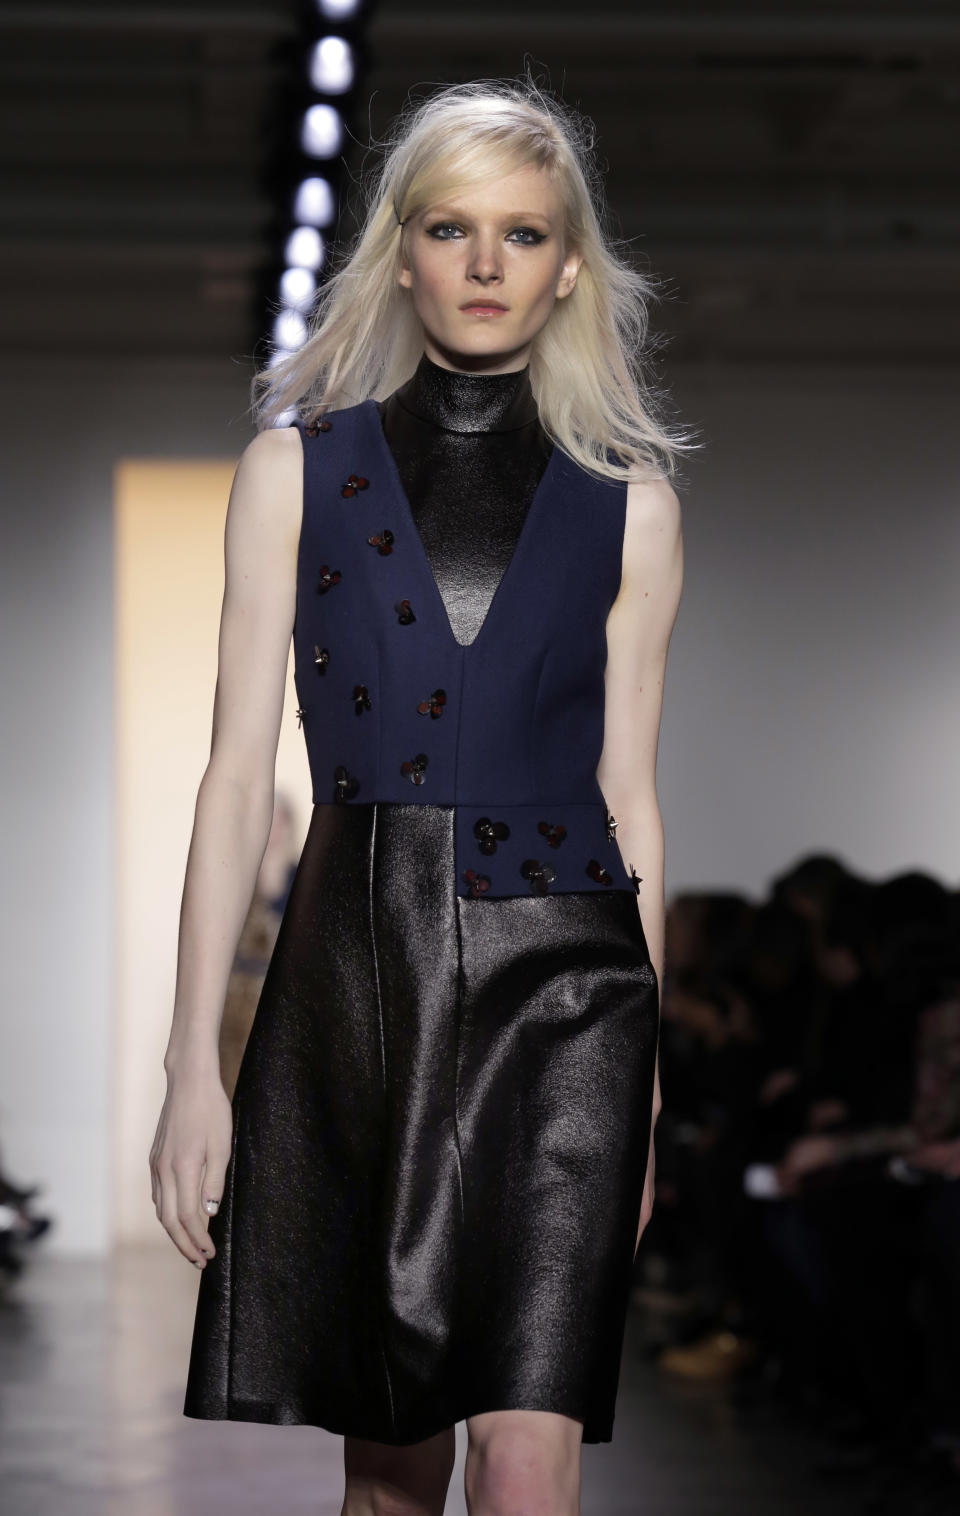 The Peter Som Fall 2014 collection is modeled during Fashion Week in New York, Friday, Feb. 7, 2014. (AP Photo/Richard Drew)